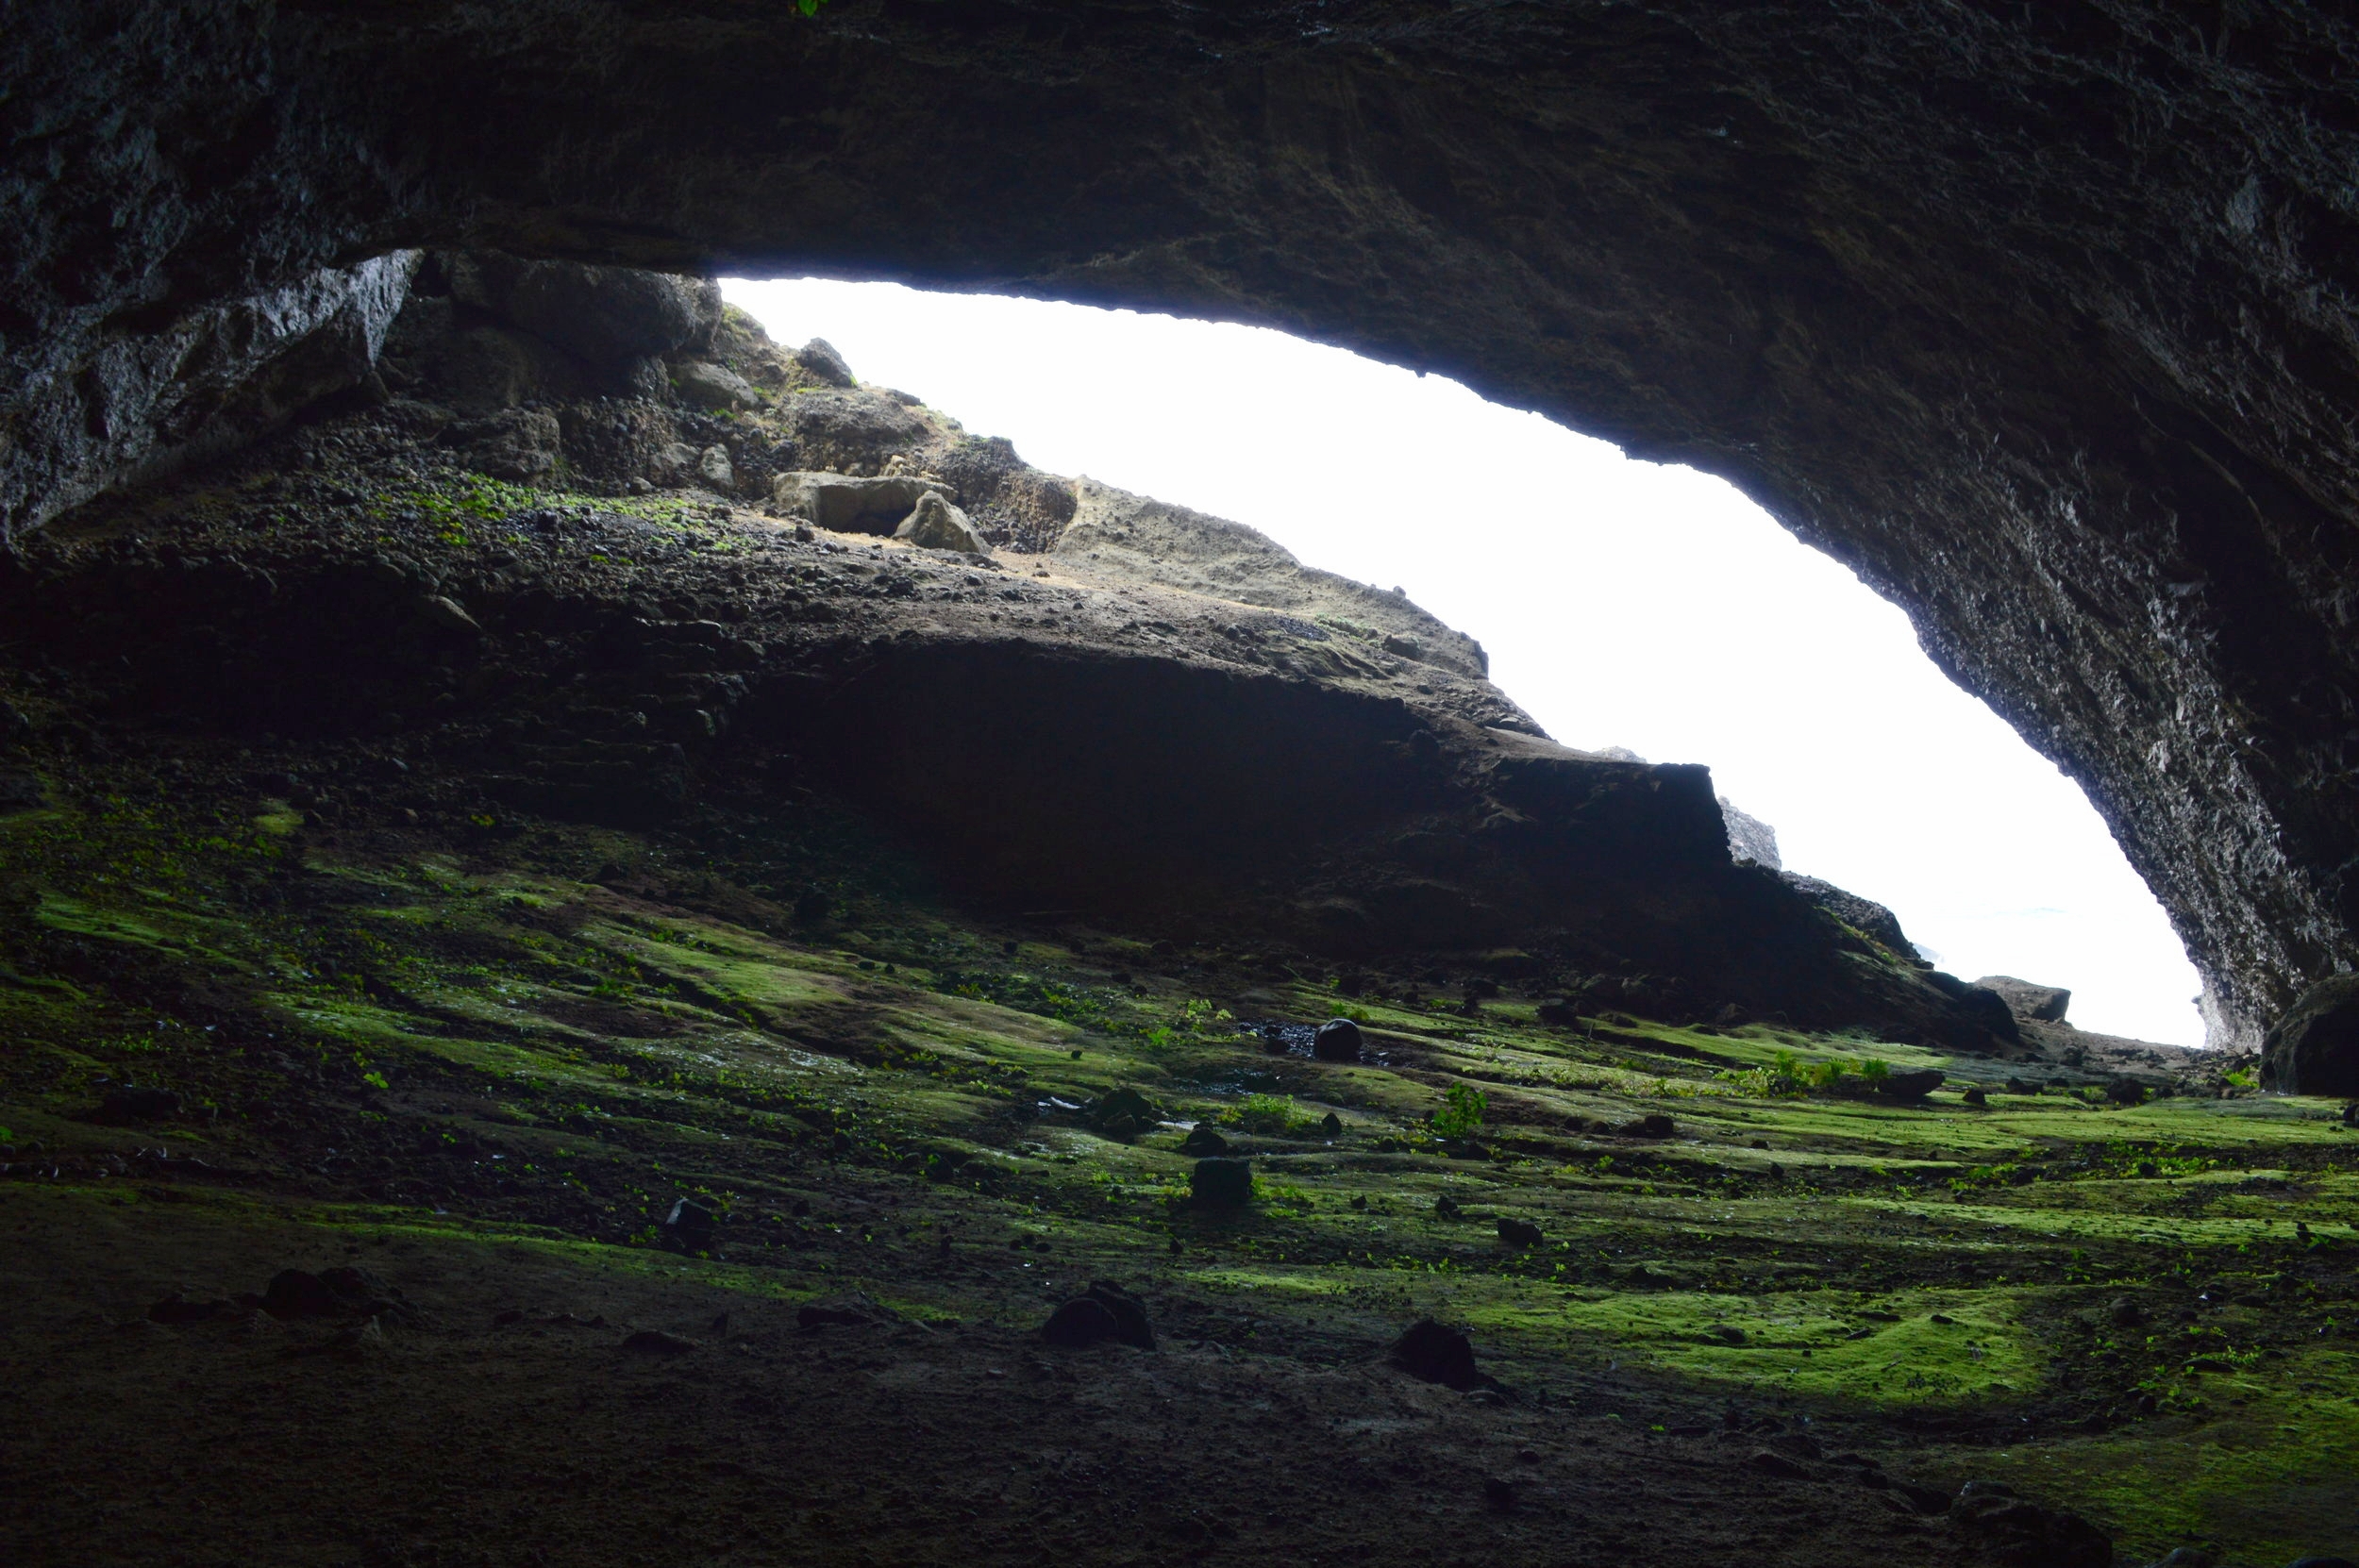  Swallow's Cave 